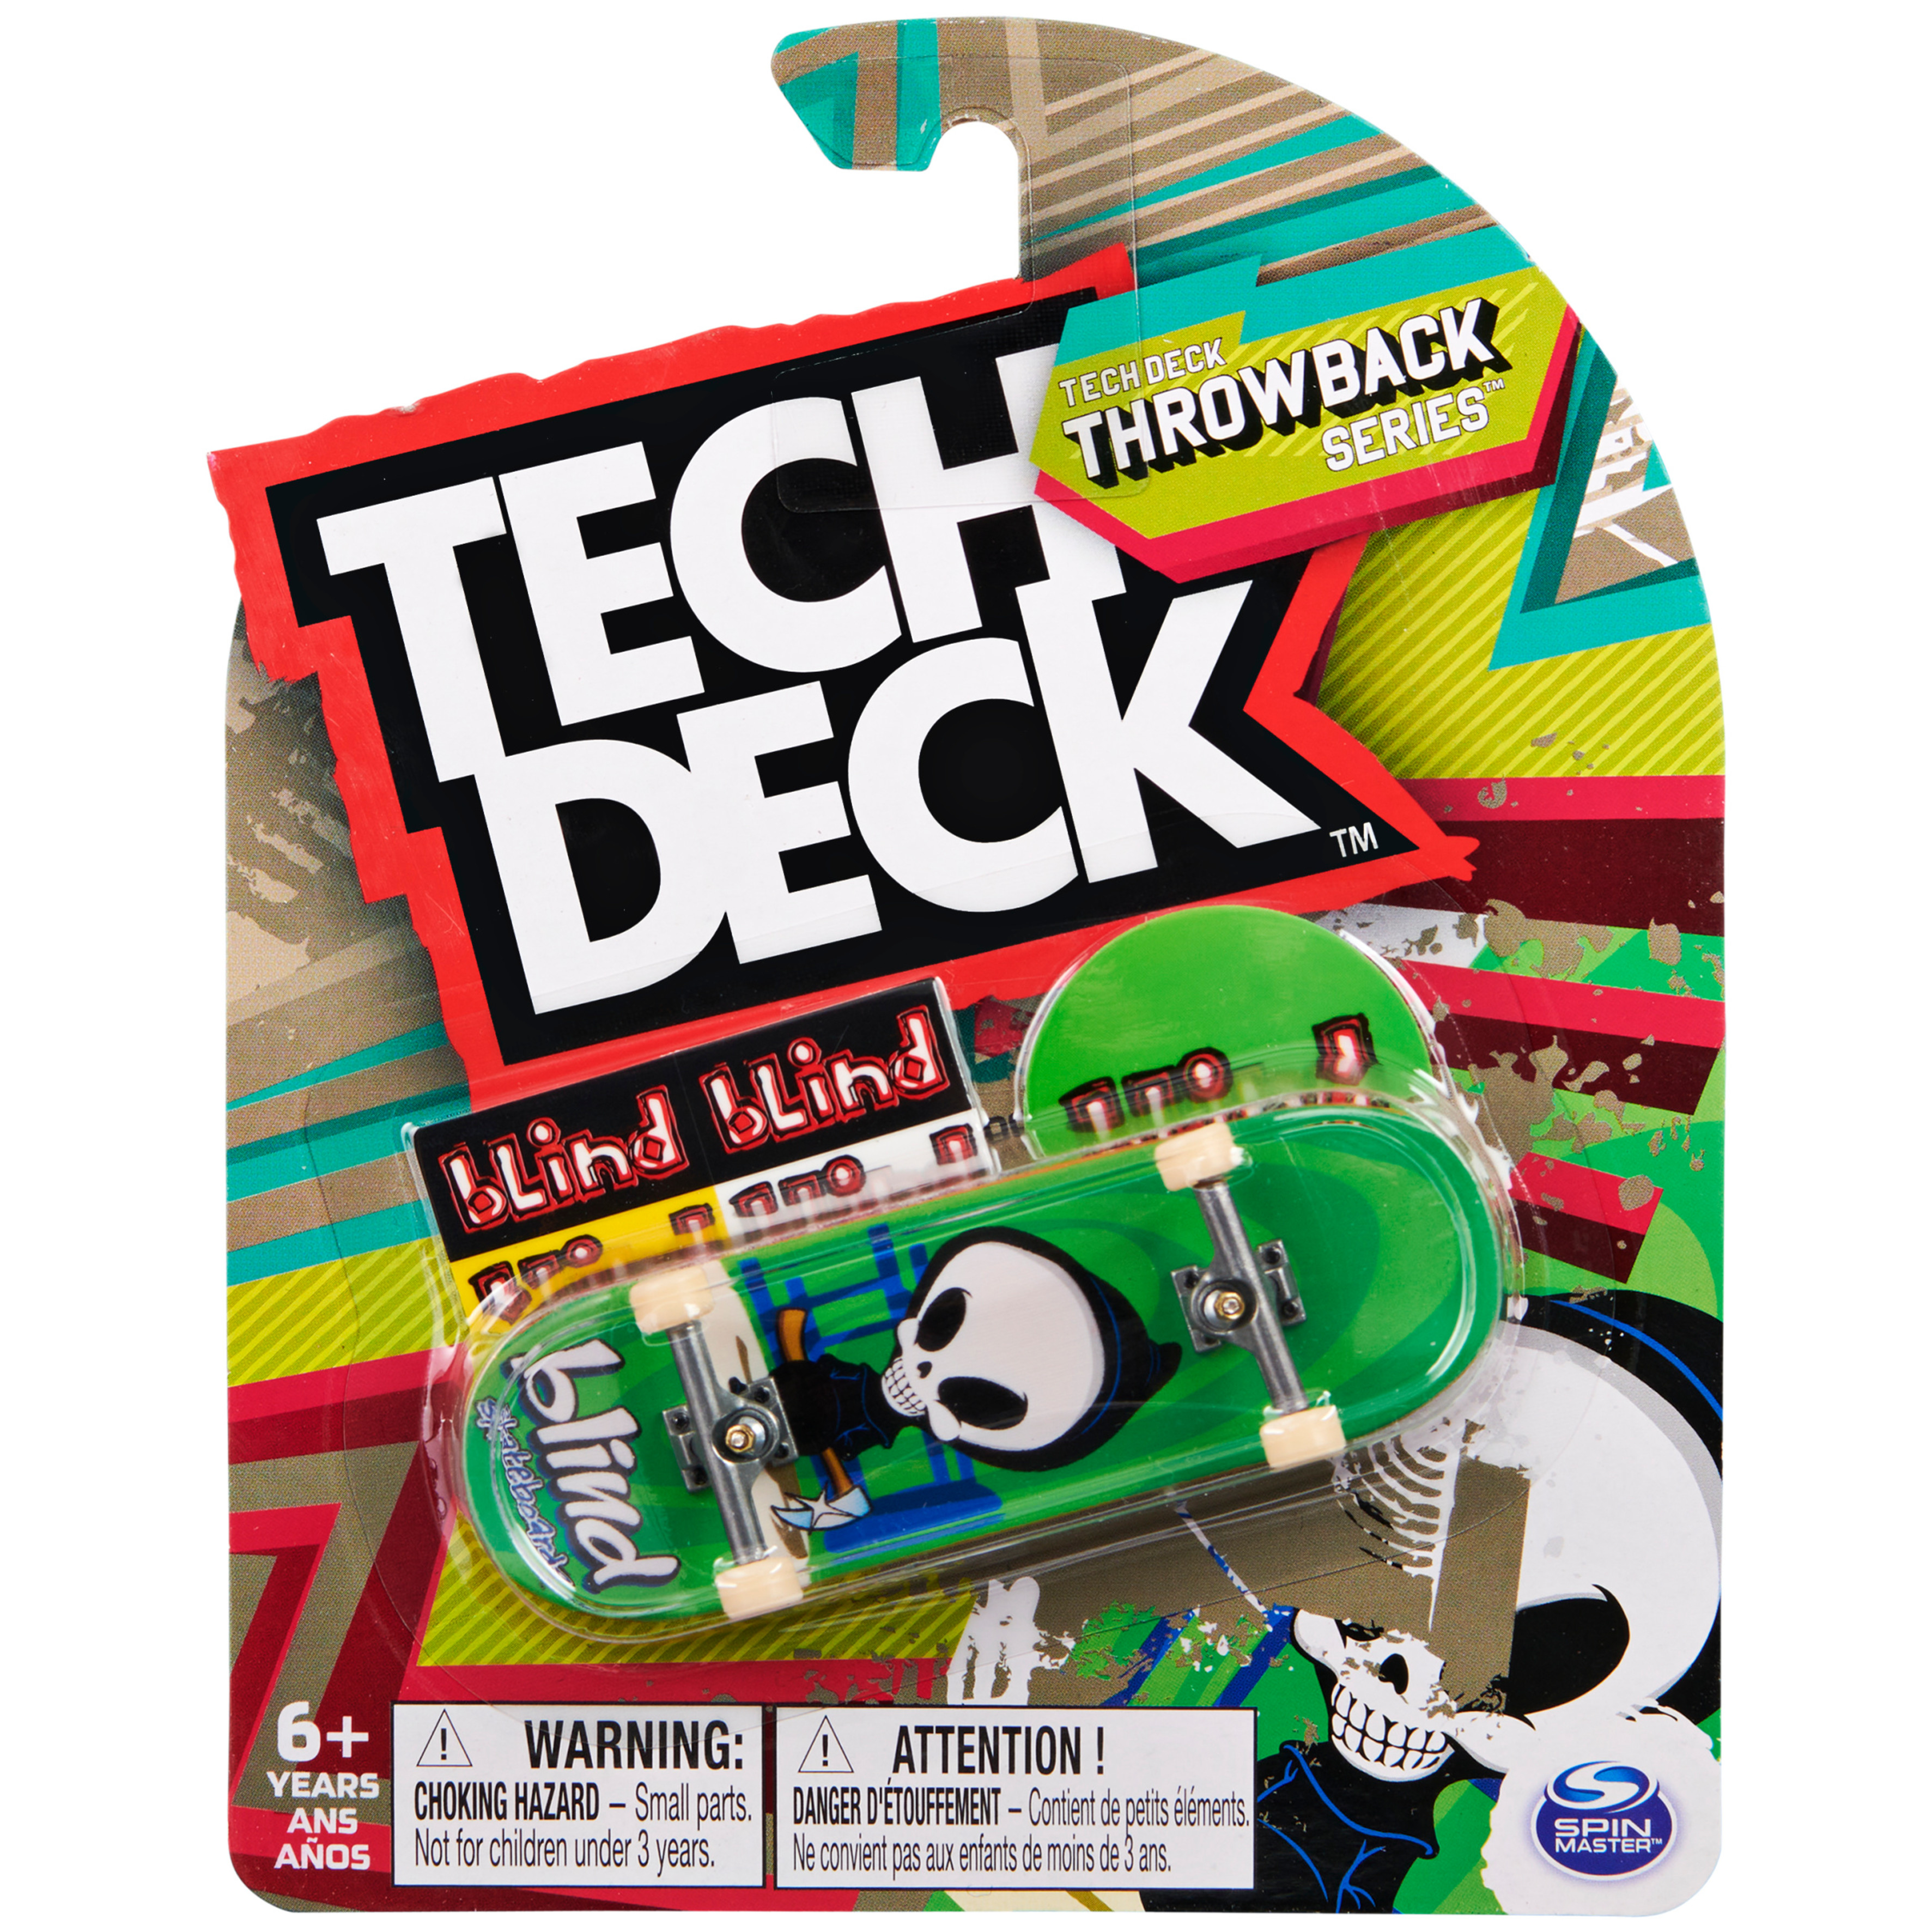 Tech Deck, 96mm Throwback Series Finger Skateboard (Styles May Vary) - image 4 of 7